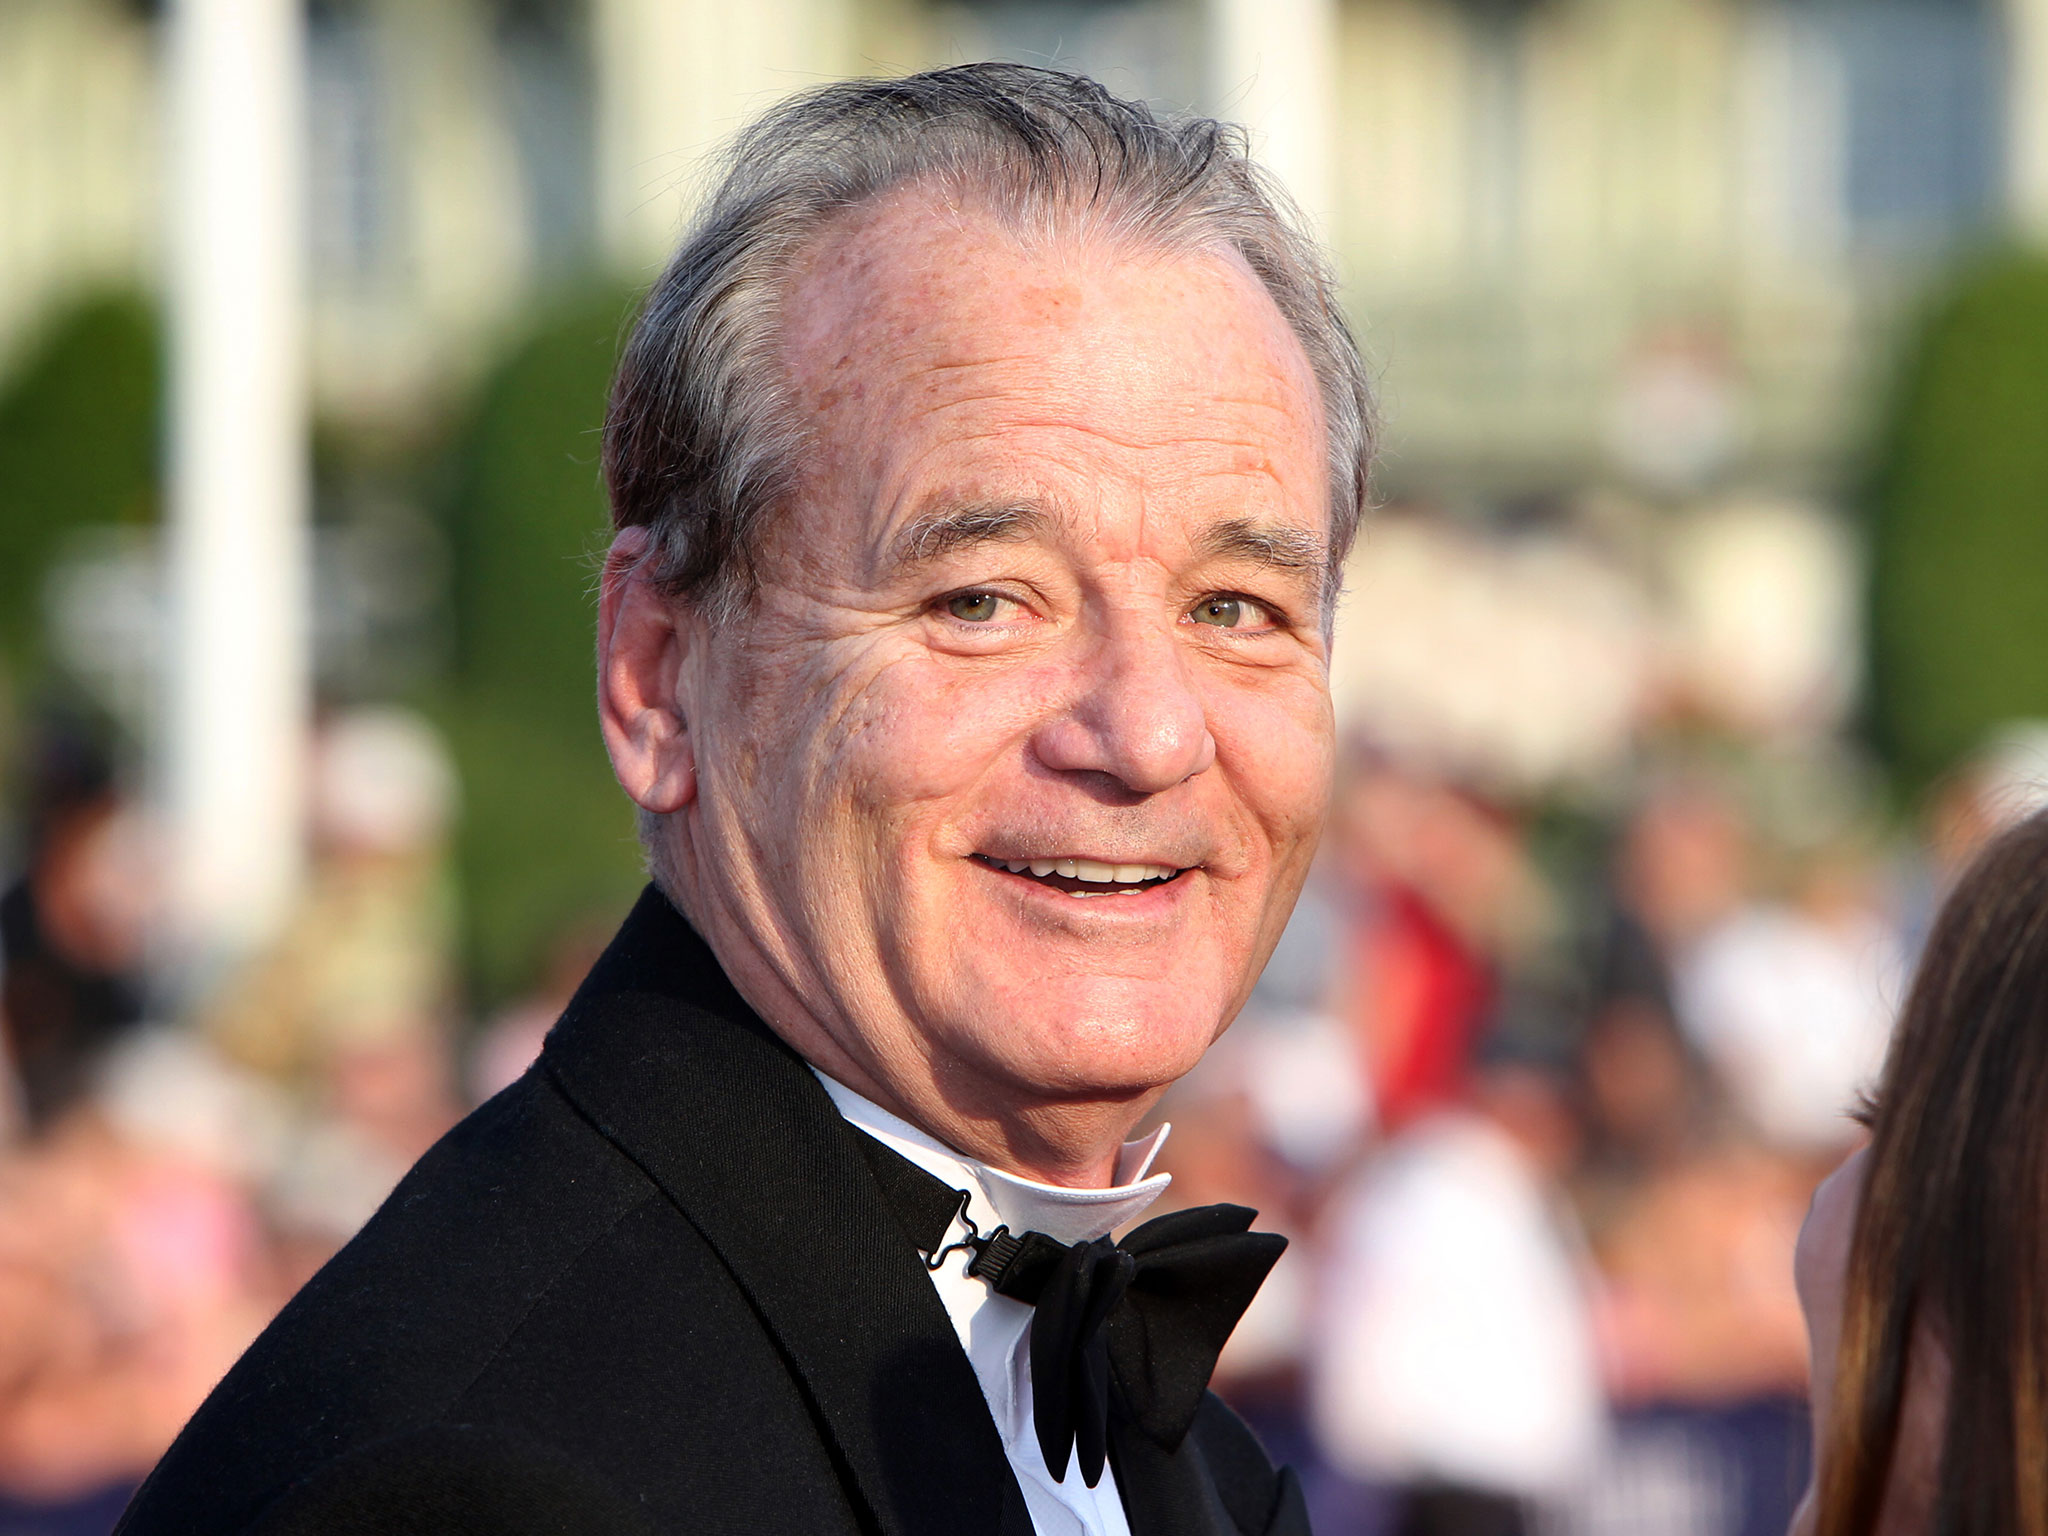 Bill Murray Backgrounds, Compatible - PC, Mobile, Gadgets| 2048x1536 px